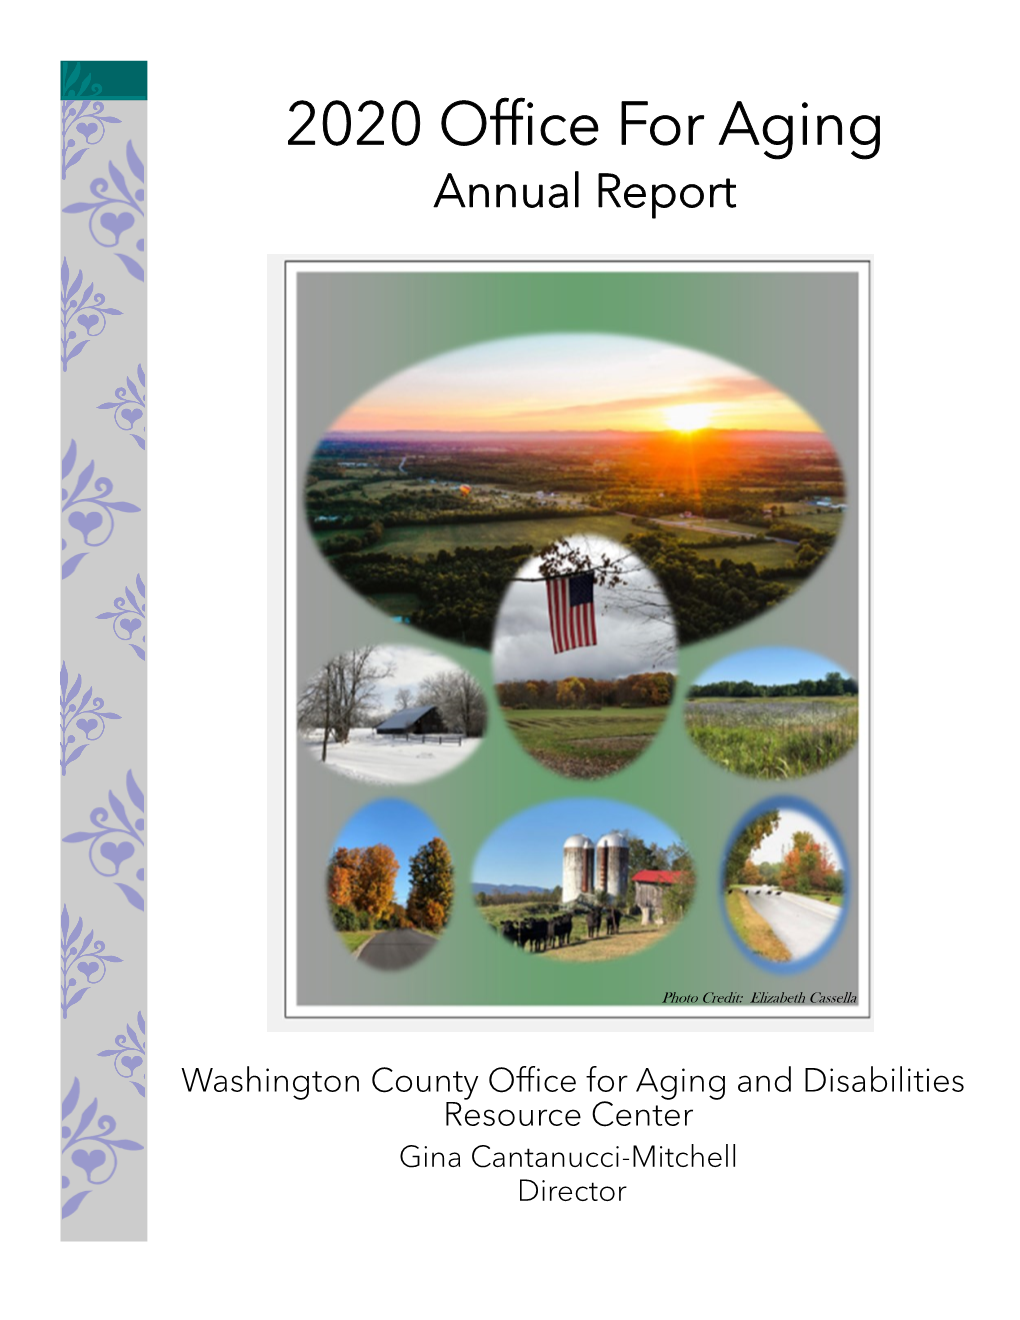 2020 Office for Aging Annual Report